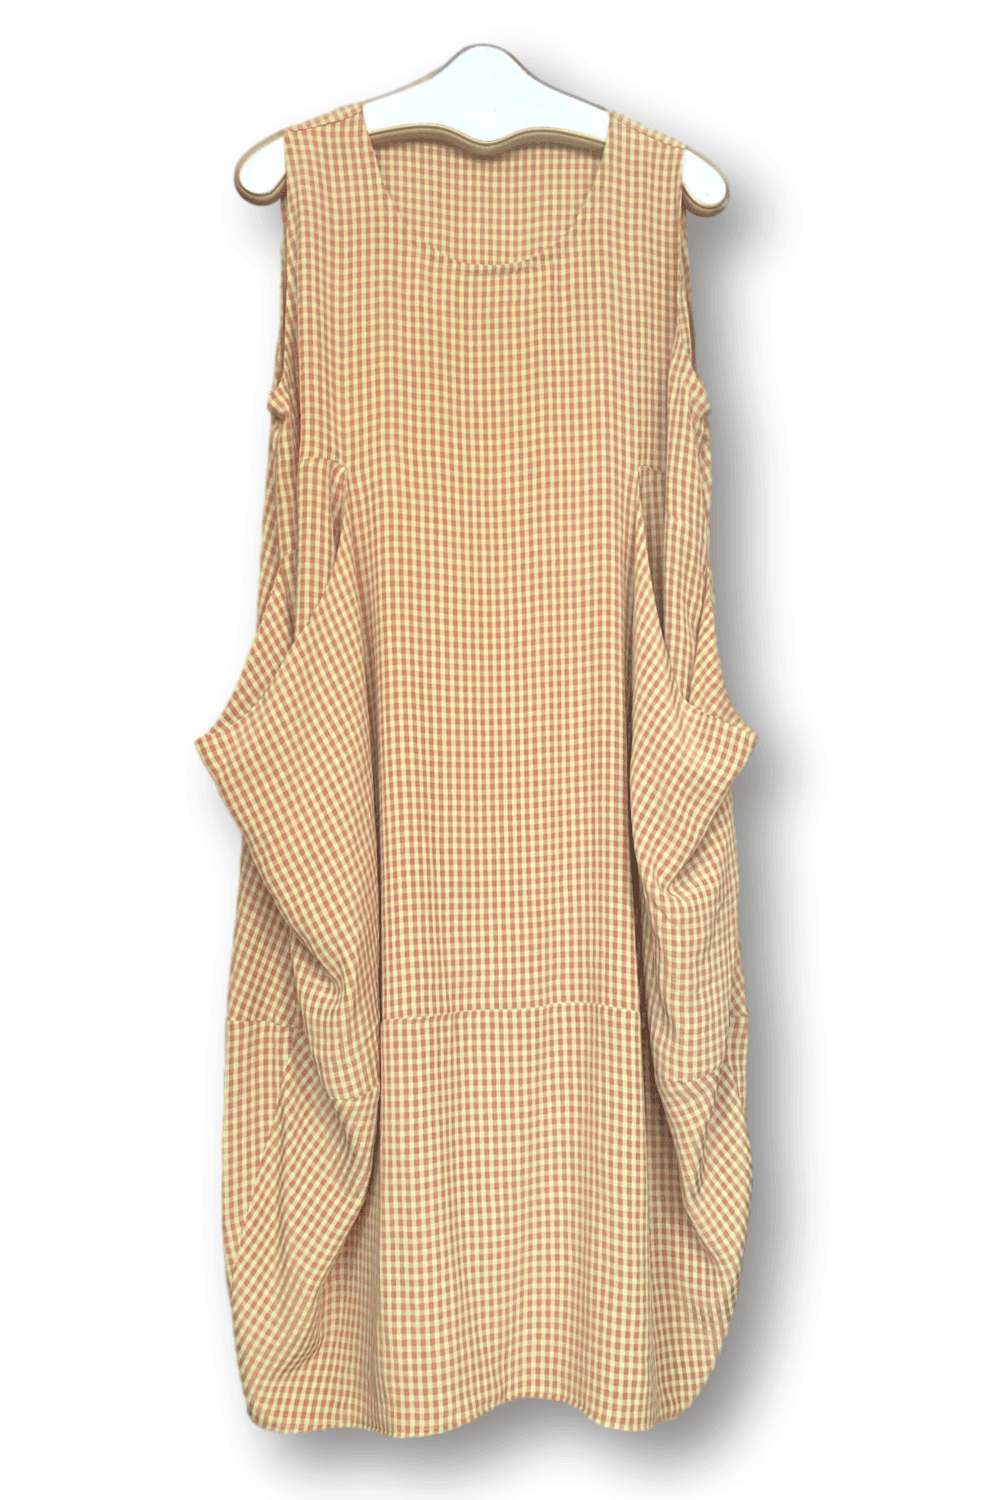 Women's summer dress hanging on a hanger. It is a slight bubble shapem tank with two large front pockets. The fabric is a baby check pattern.